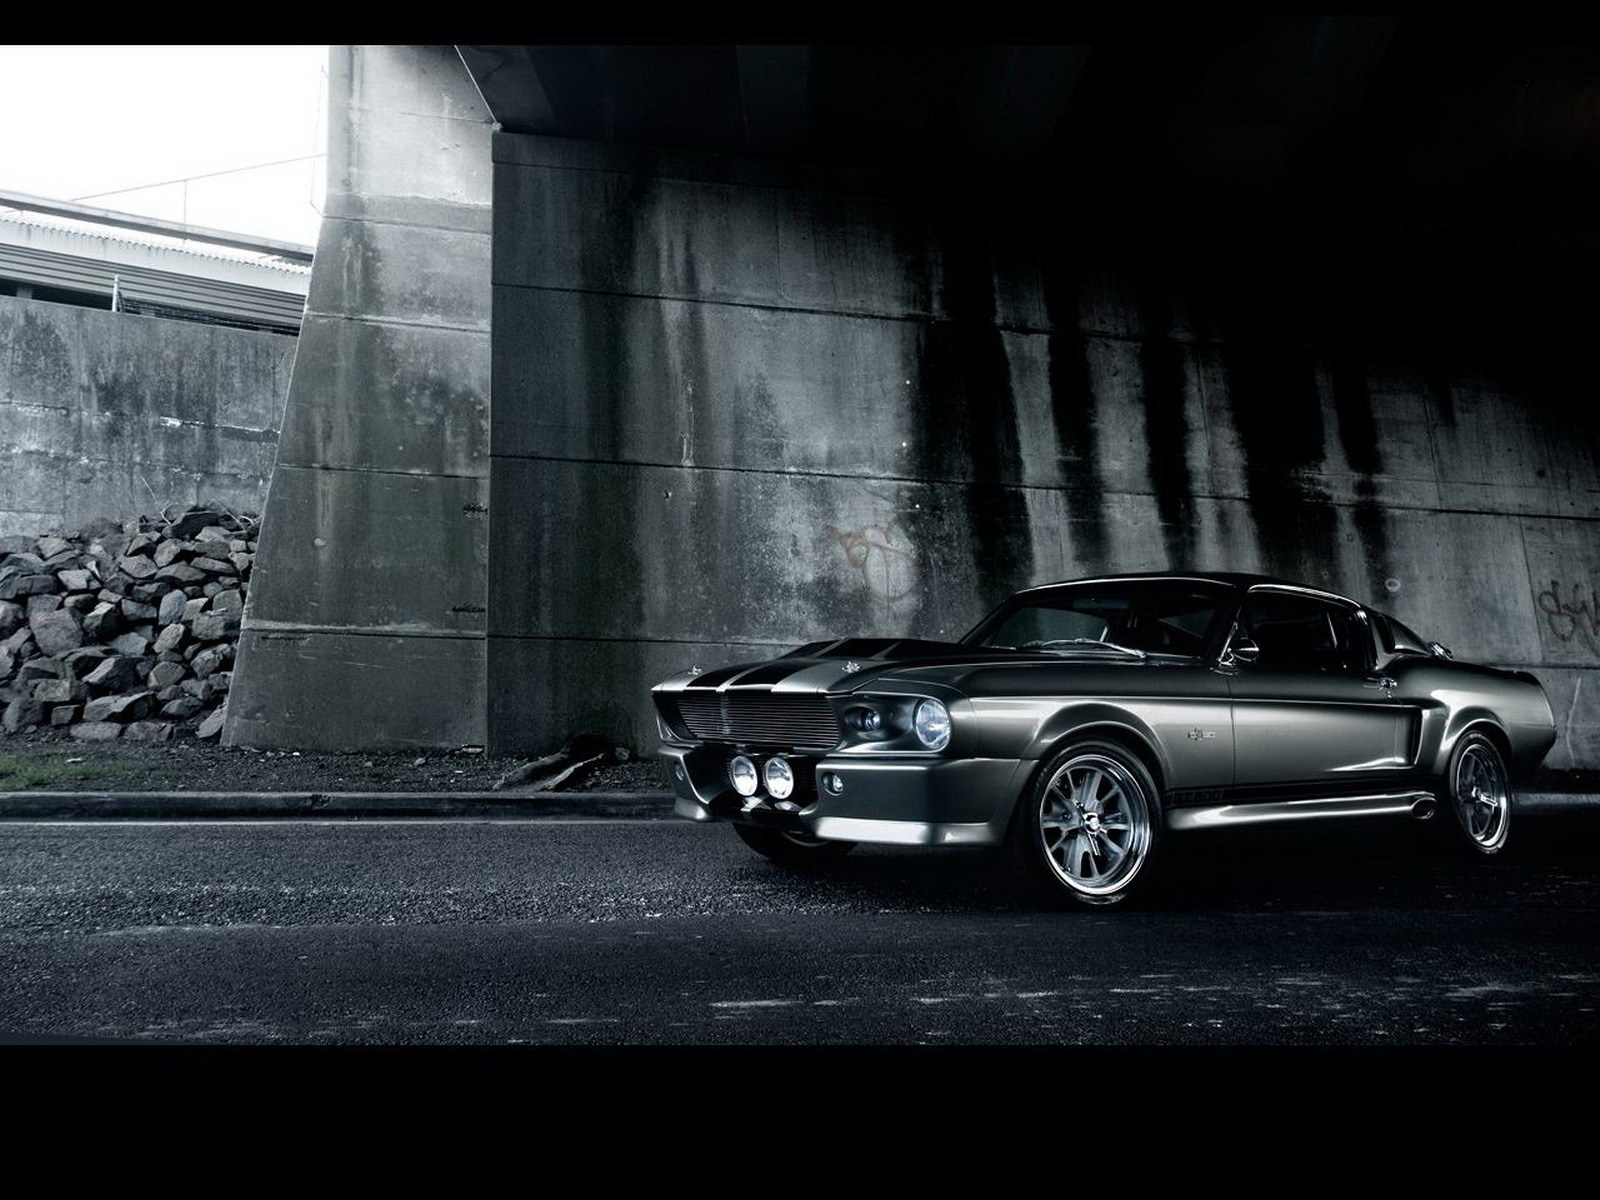 mustang, transport, art photo, auto, ford, black images